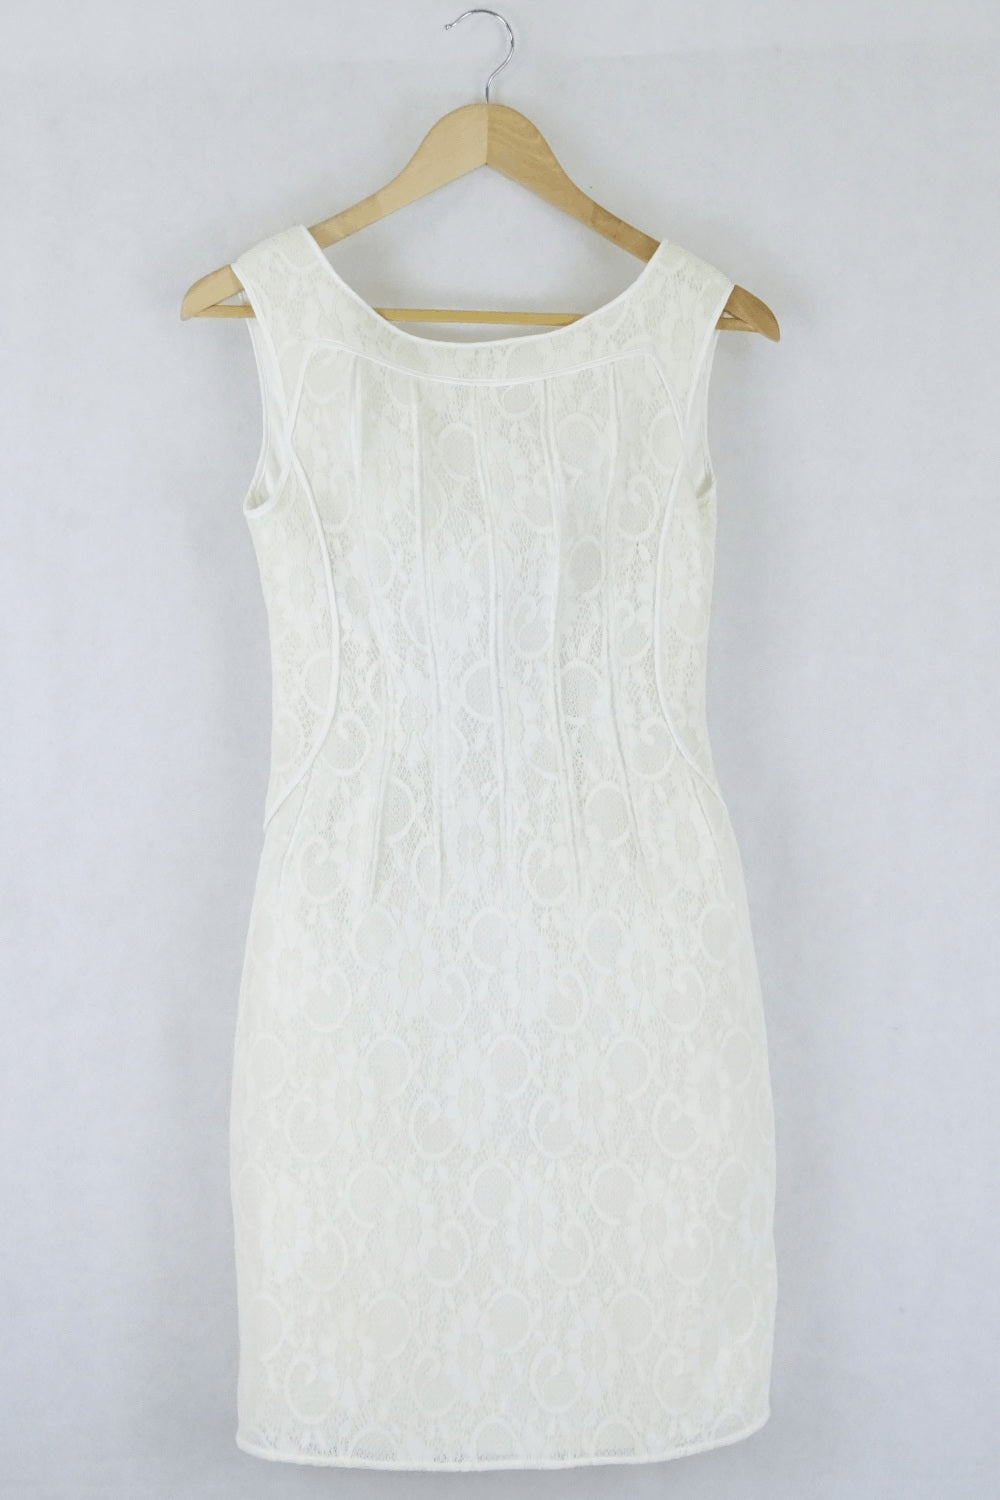 Phase Eight Cream Lace Cocktail Dress 8